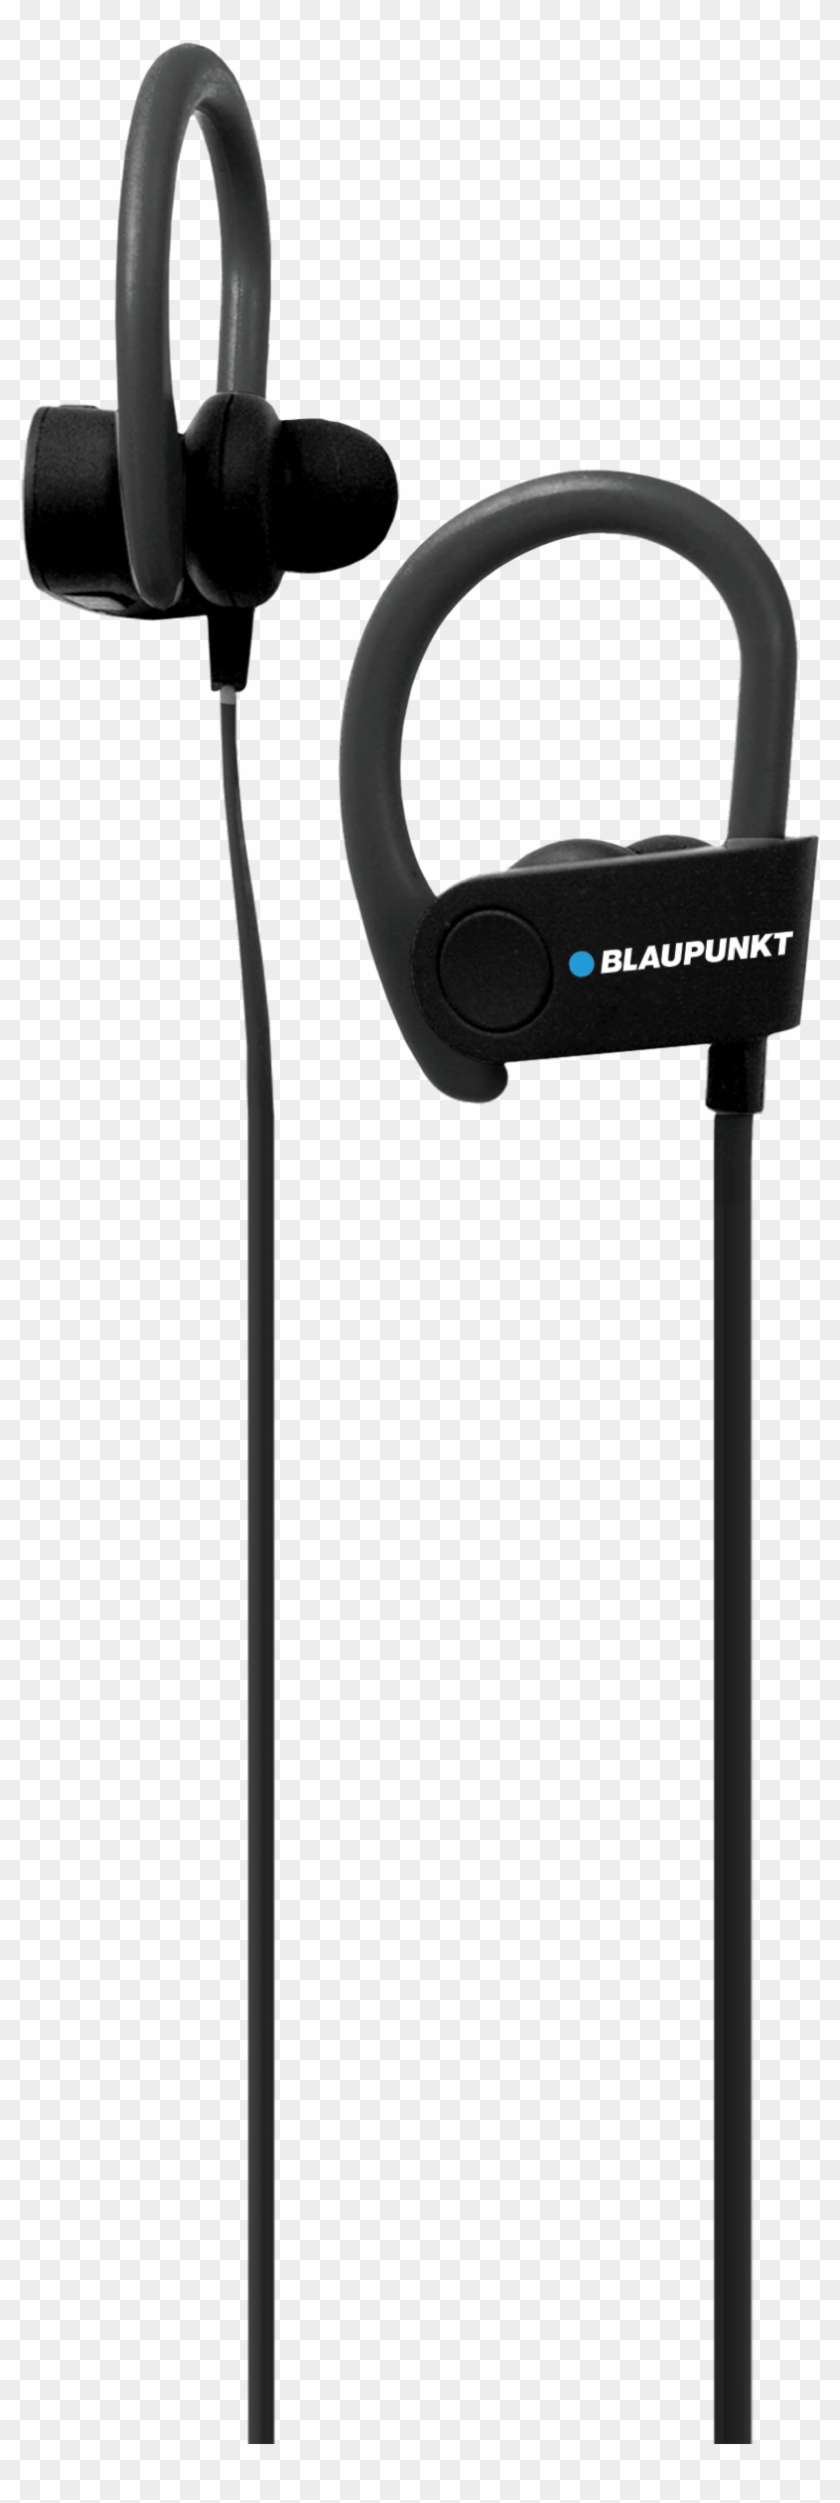 Black Wired Earbuds - Billboard Bluetooth Earbuds Clipart